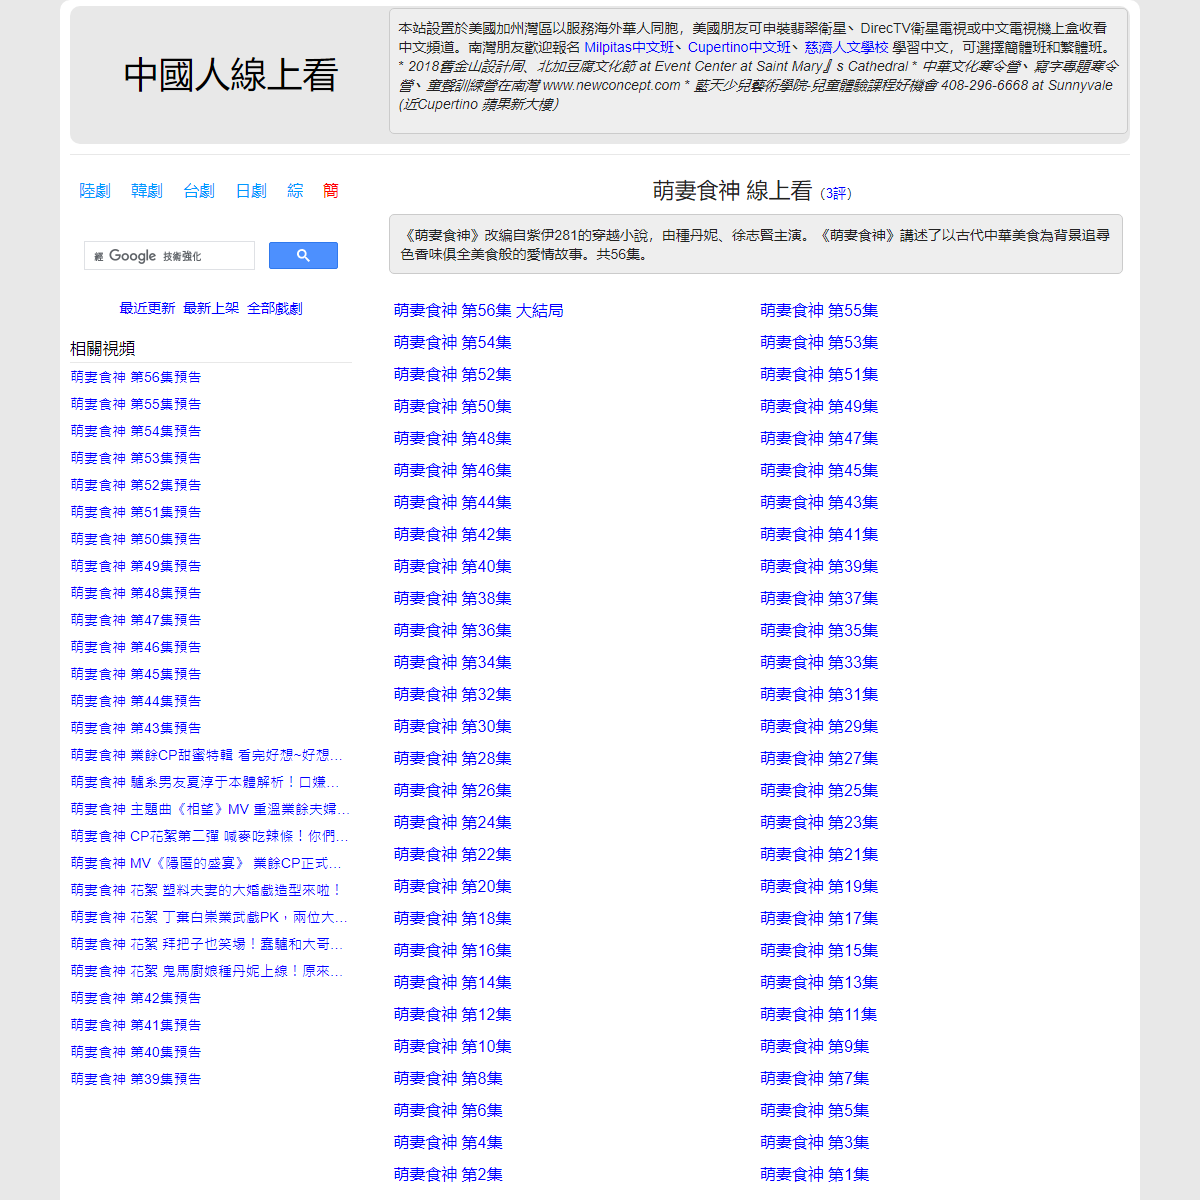 A complete backup of https://chinaq.tv/cn180423d/